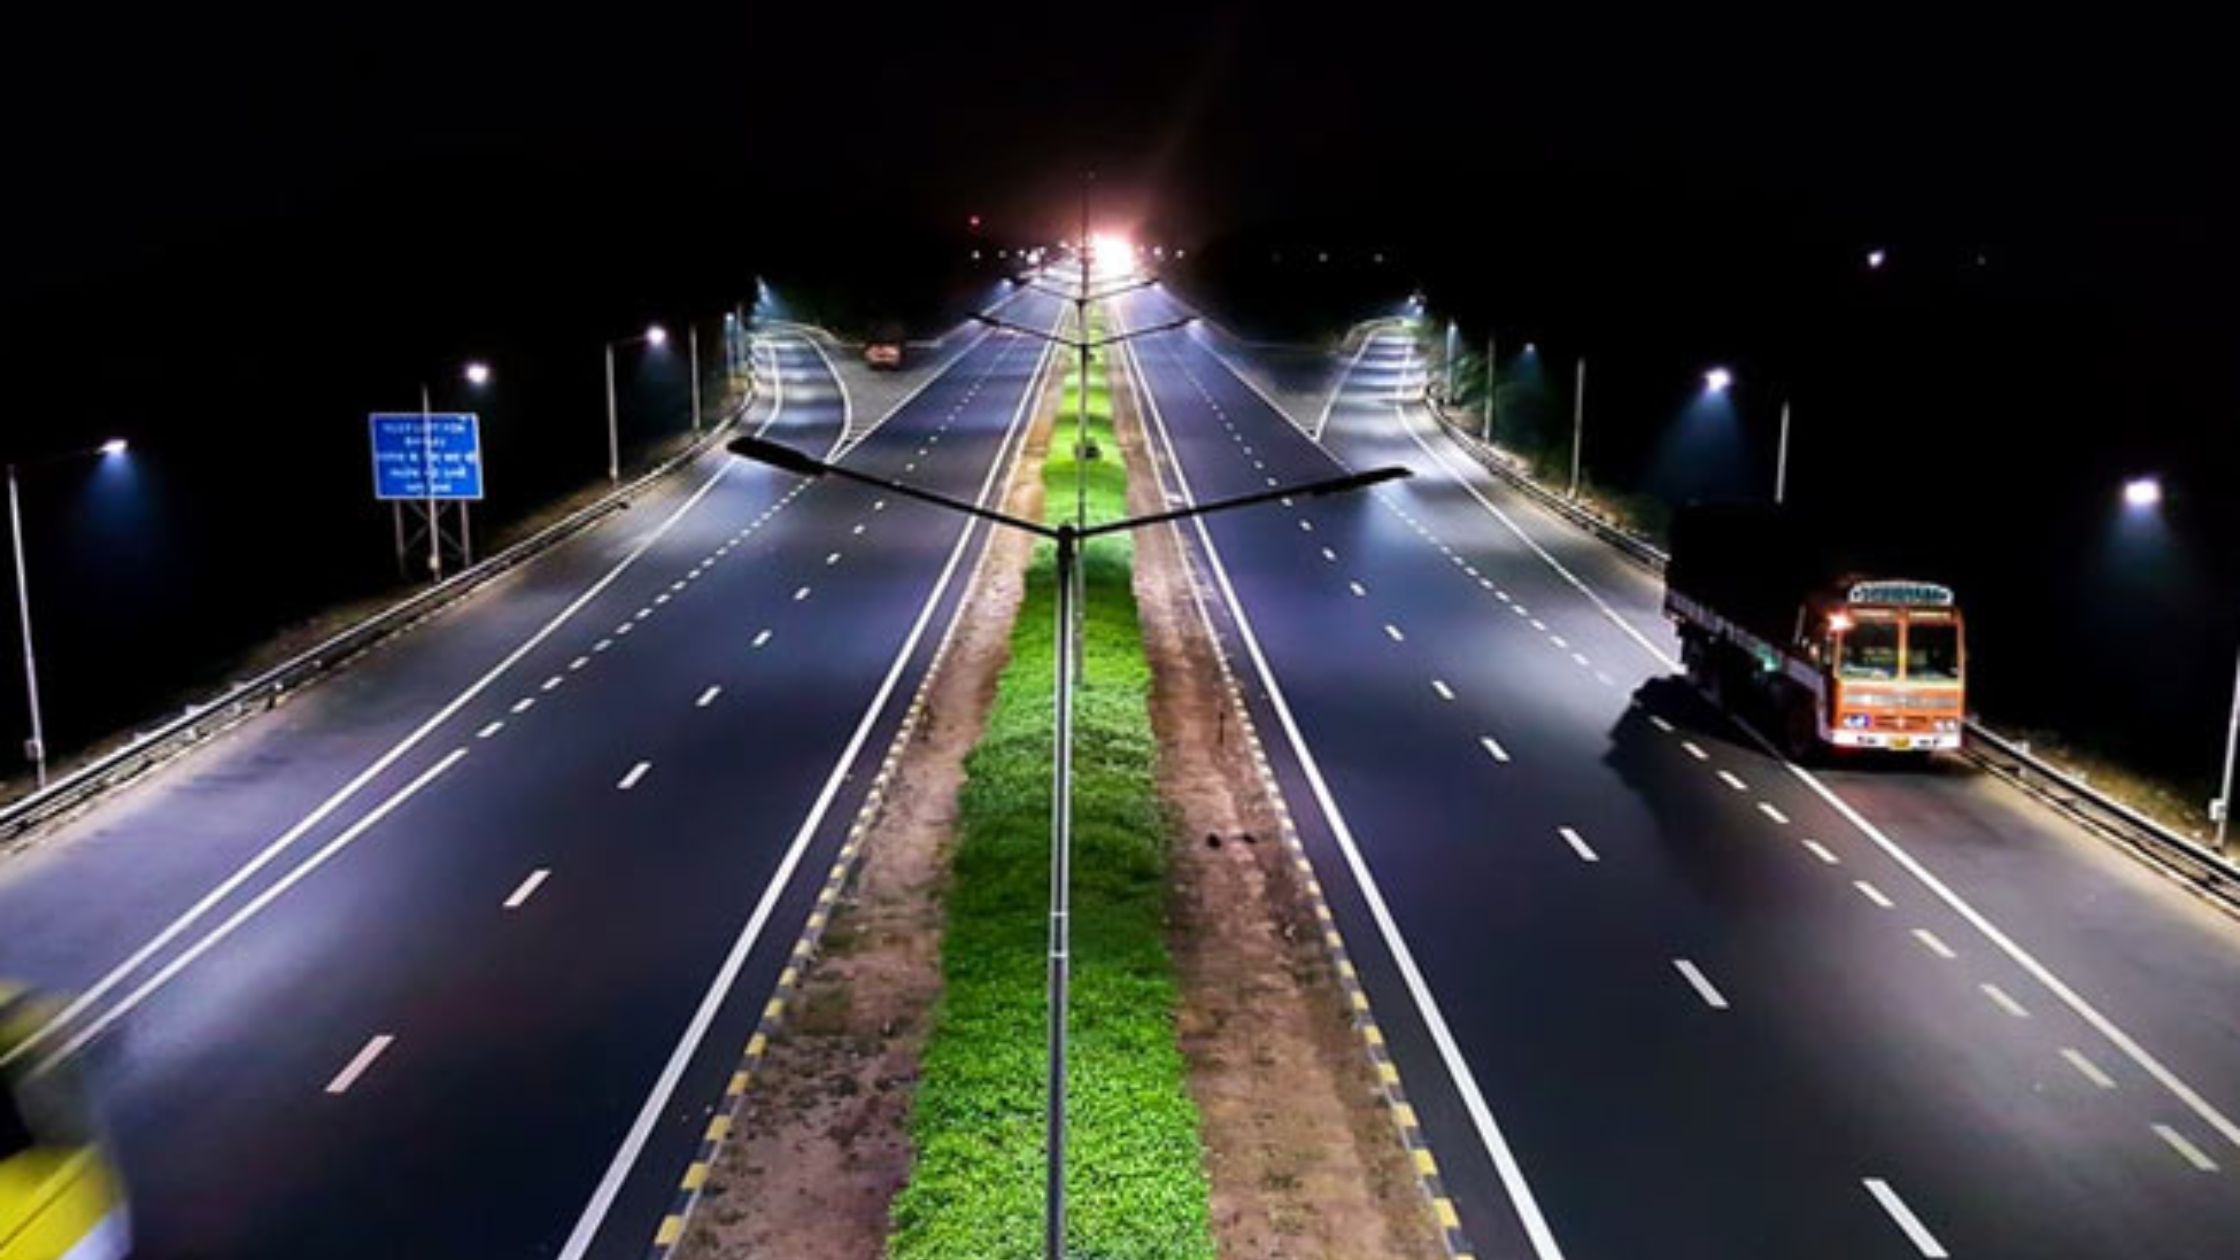 21 national highway projects work to start soon in bihar